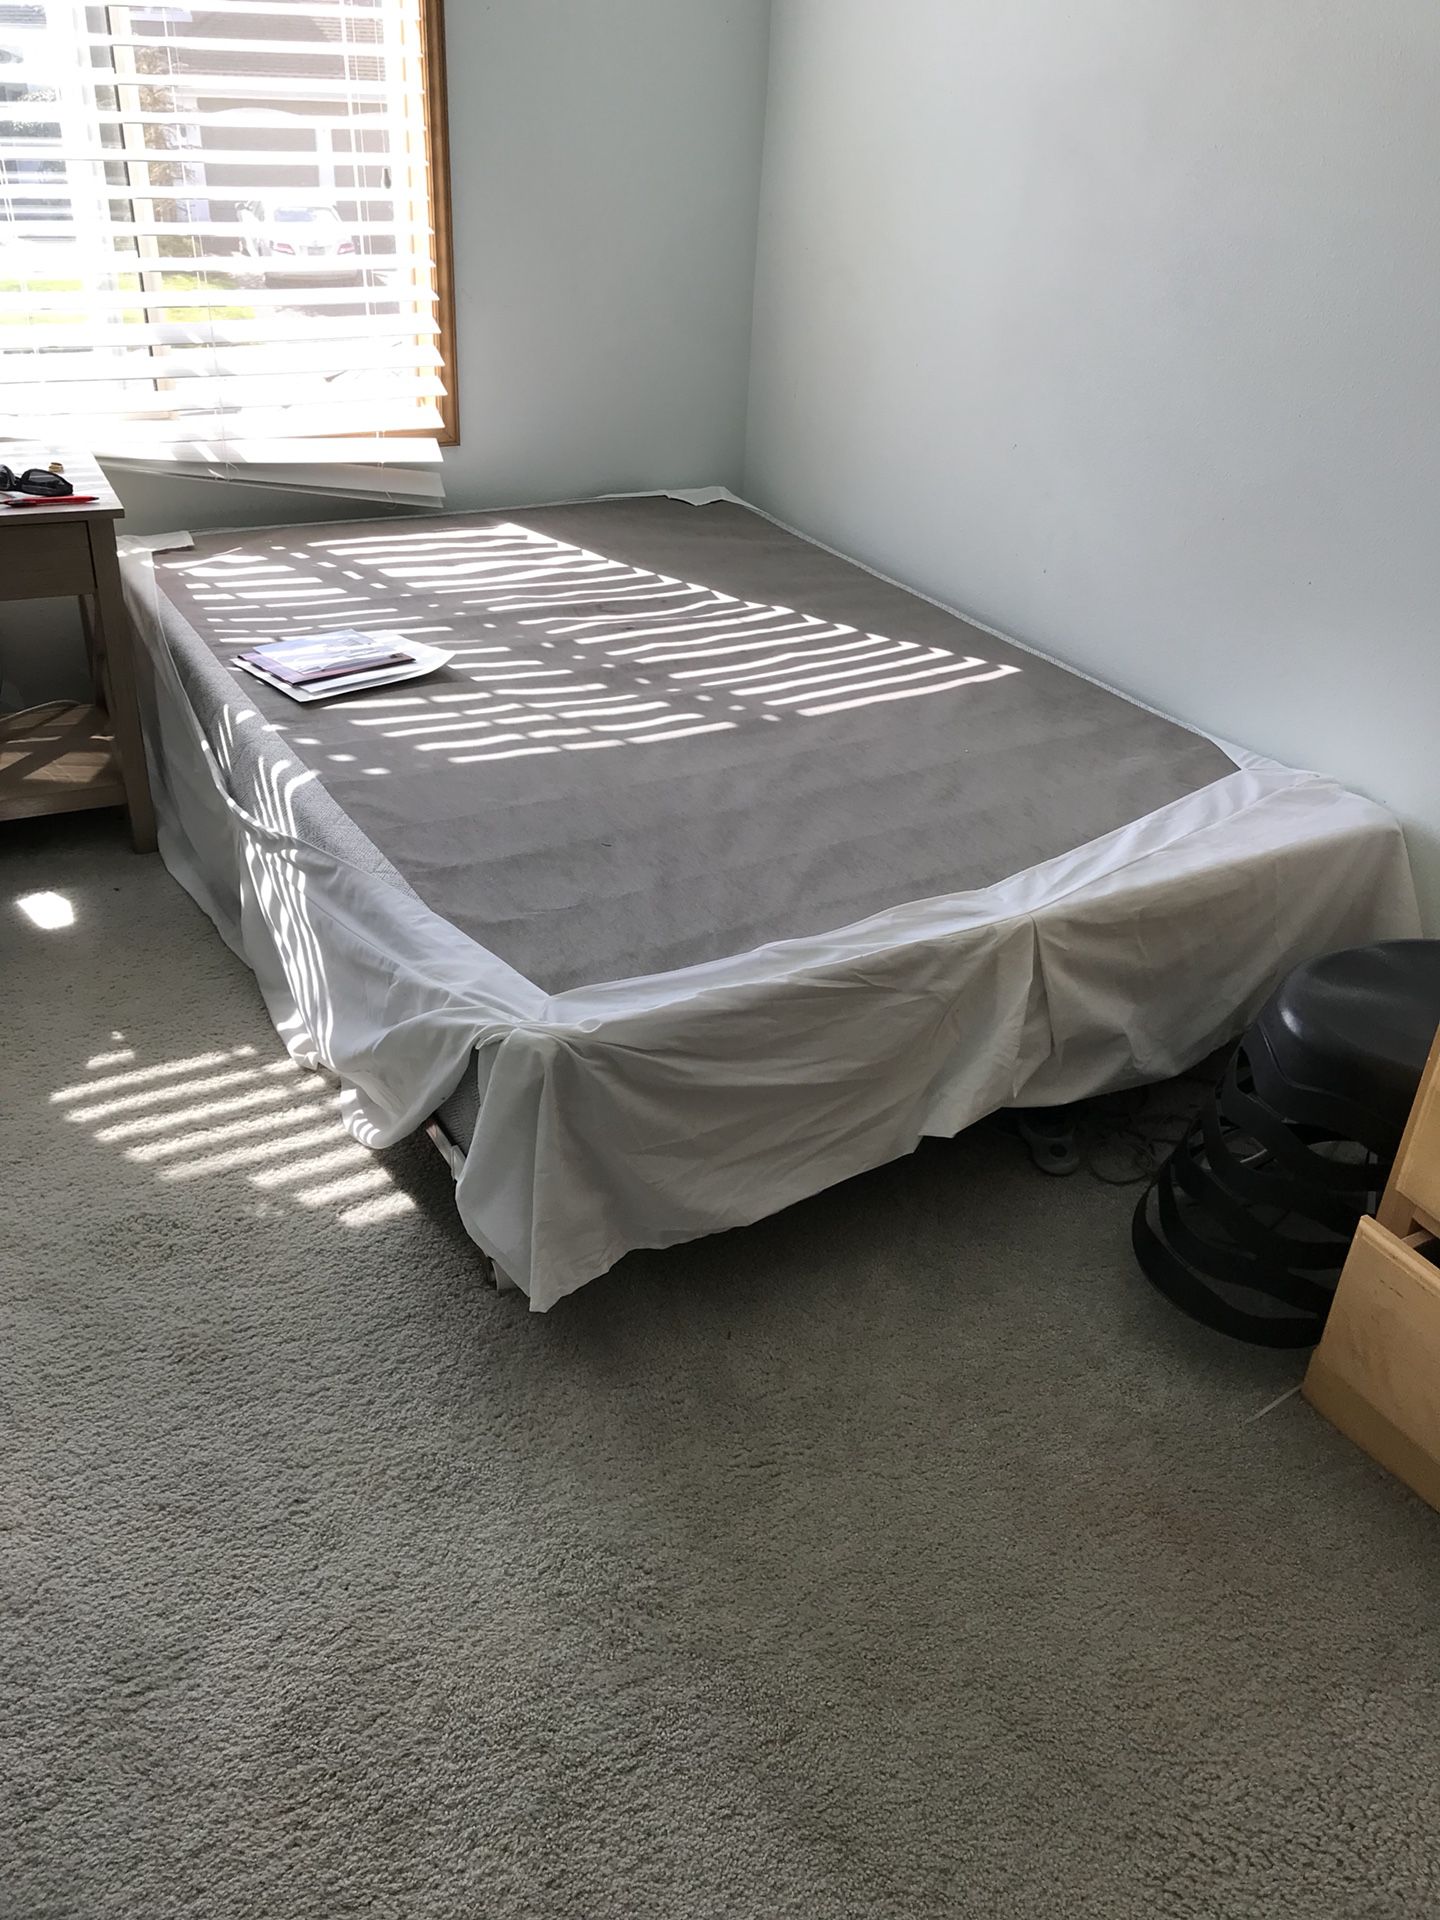 Full size box spring and bed frame.